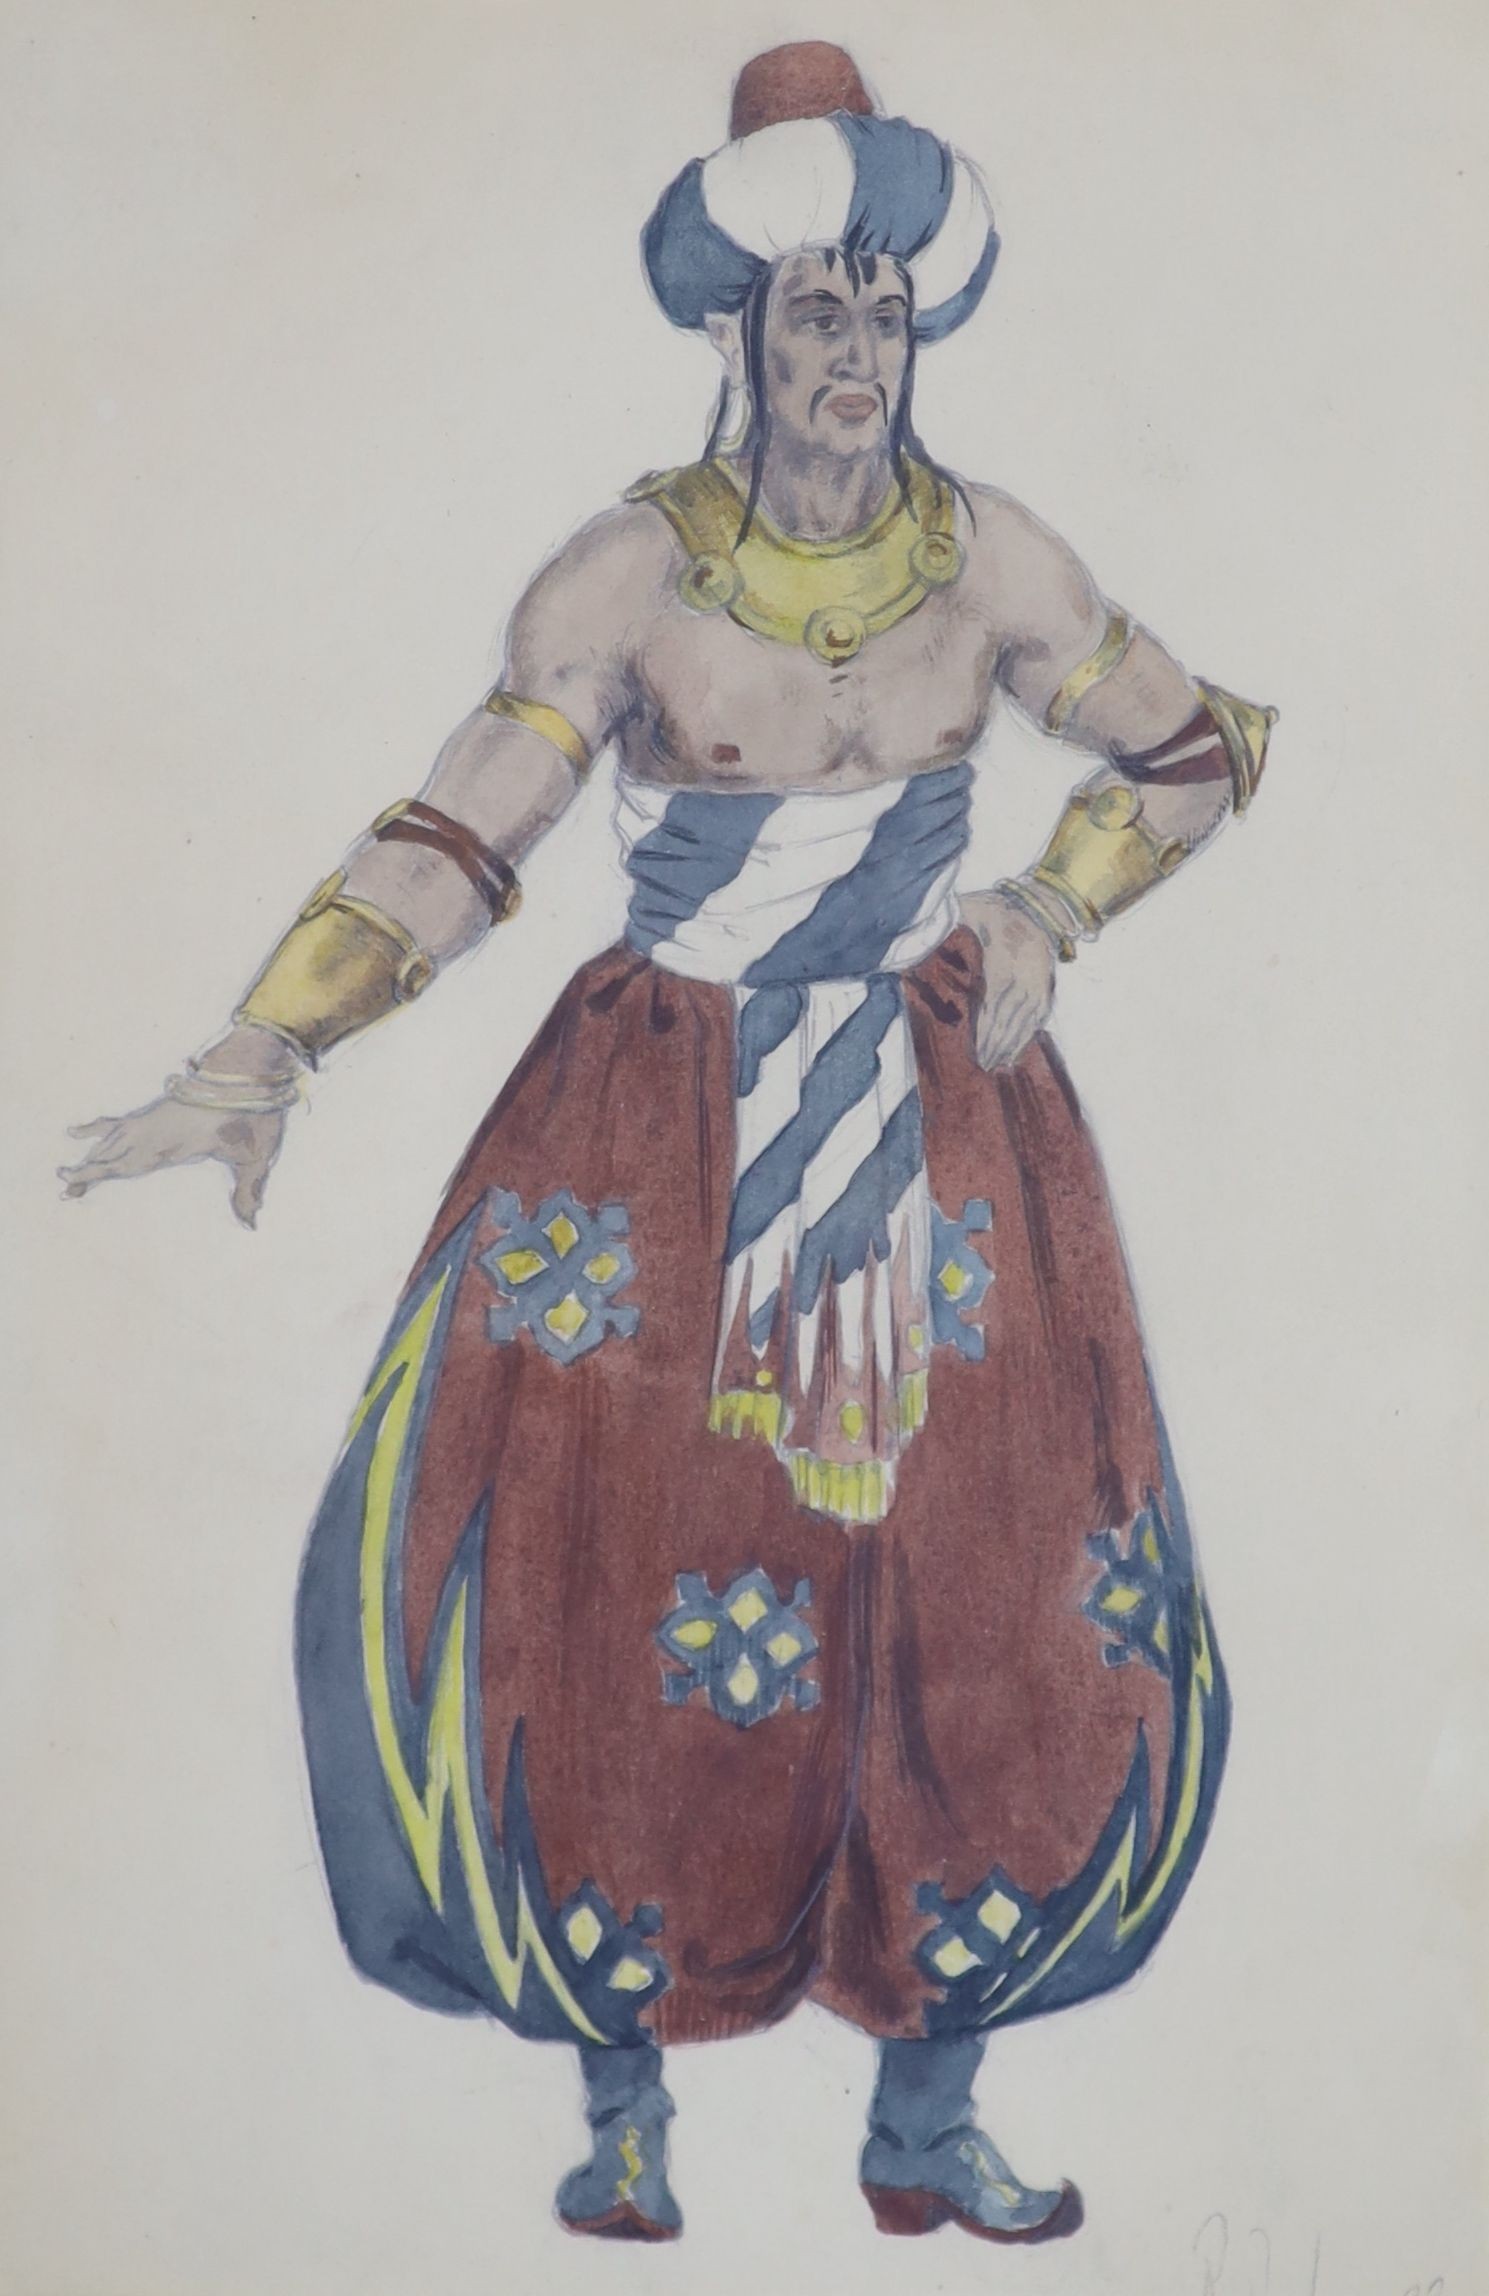 Four opera or theatre costume designs, pencil and watercolour, one indistinctly signed and dated ‘33’, largest 26 x 16.5 cm